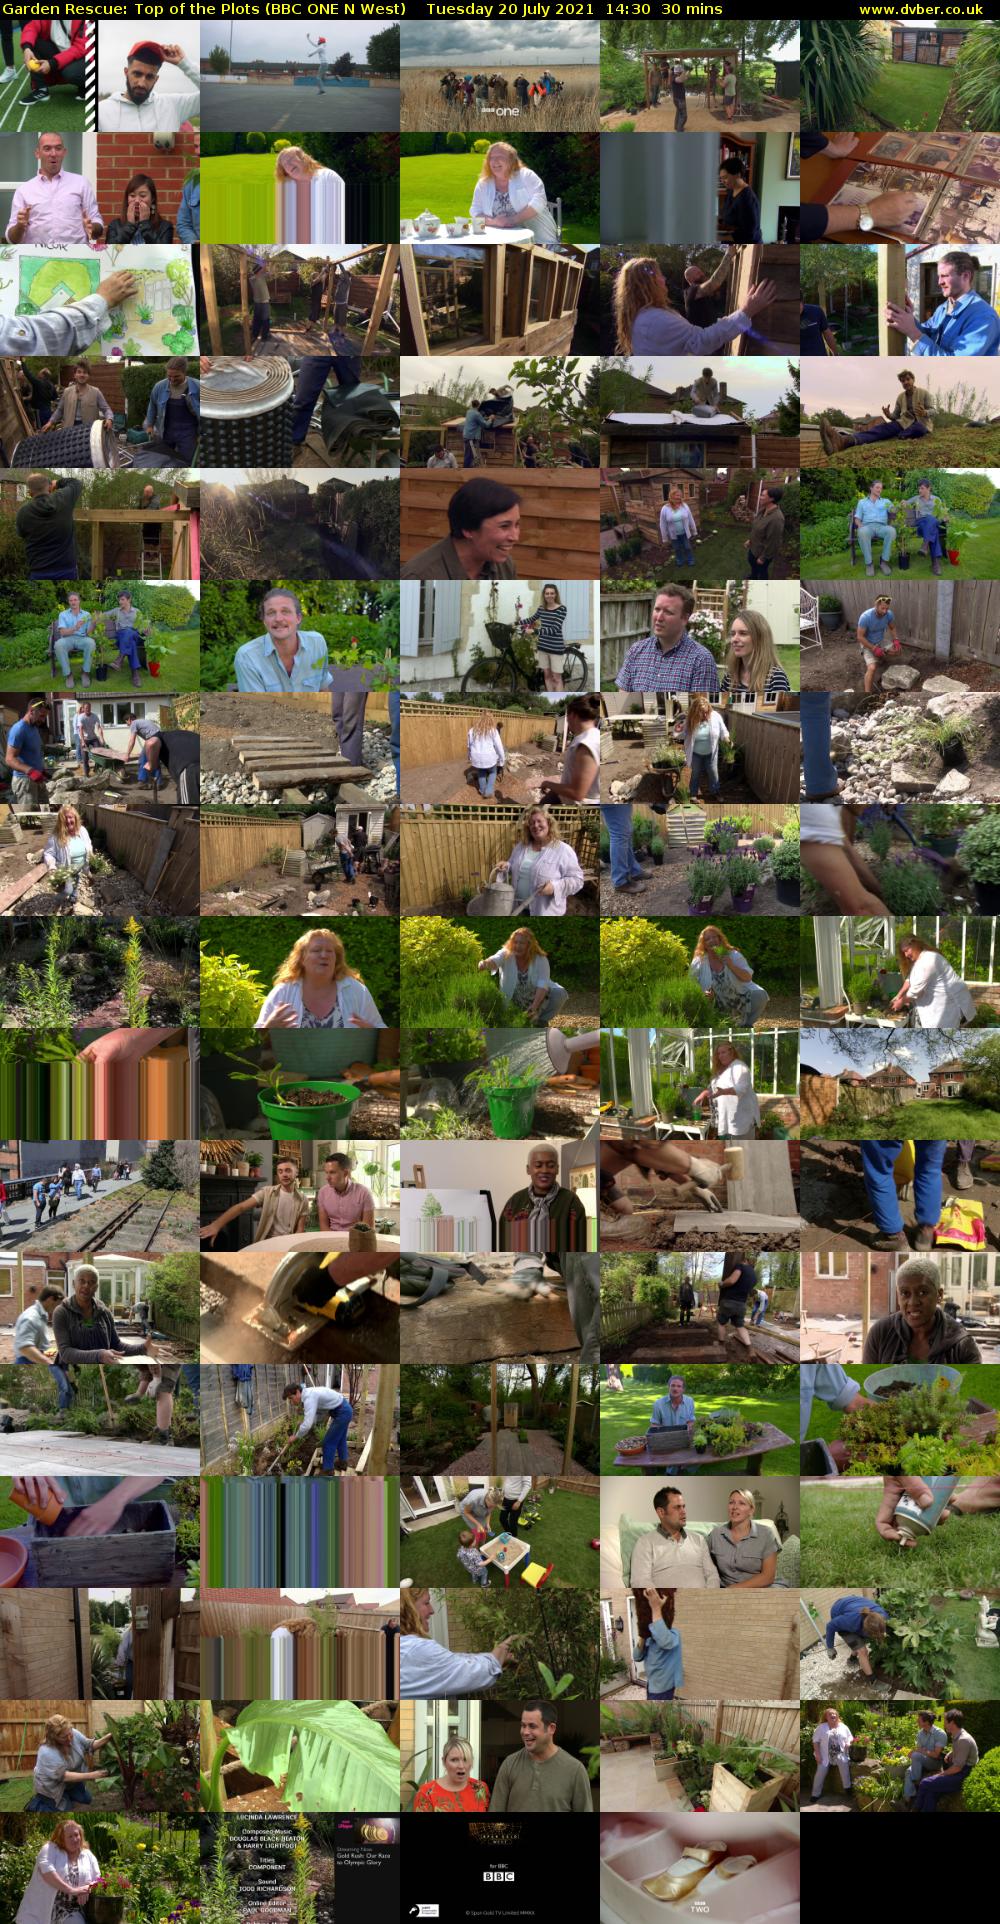 Garden Rescue: Top of the Plots (BBC ONE N West) Tuesday 20 July 2021 14:30 - 15:00